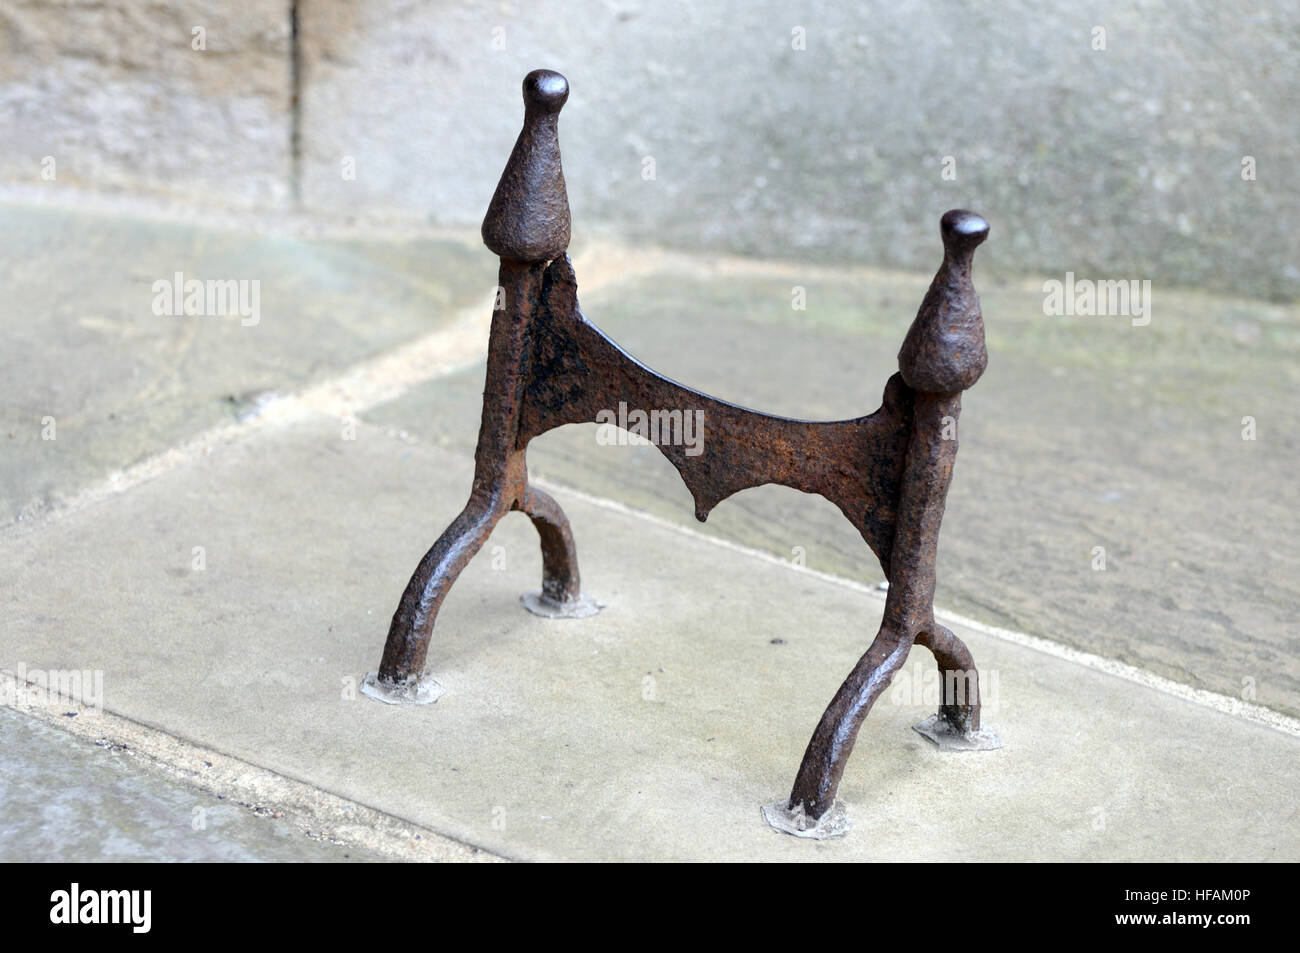 https://c8.alamy.com/comp/HFAM0P/ancient-iron-boot-scraper-in-the-porch-of-st-margarets-church-kings-HFAM0P.jpg